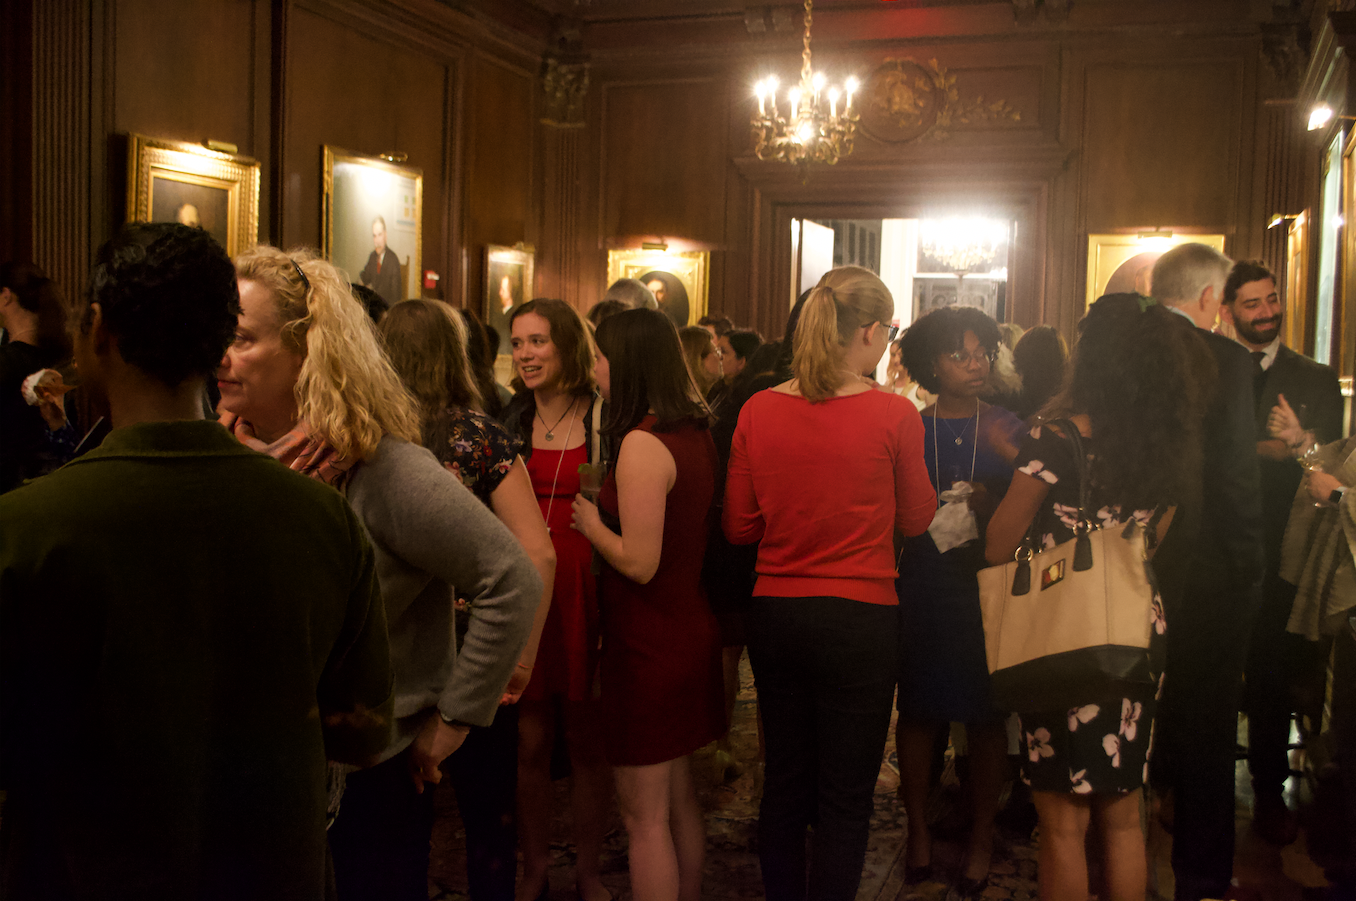 Reporting Fellows chat before dinner at the Cosmos Club. Image by Nora Moraga-Lewy. United States, 2019.